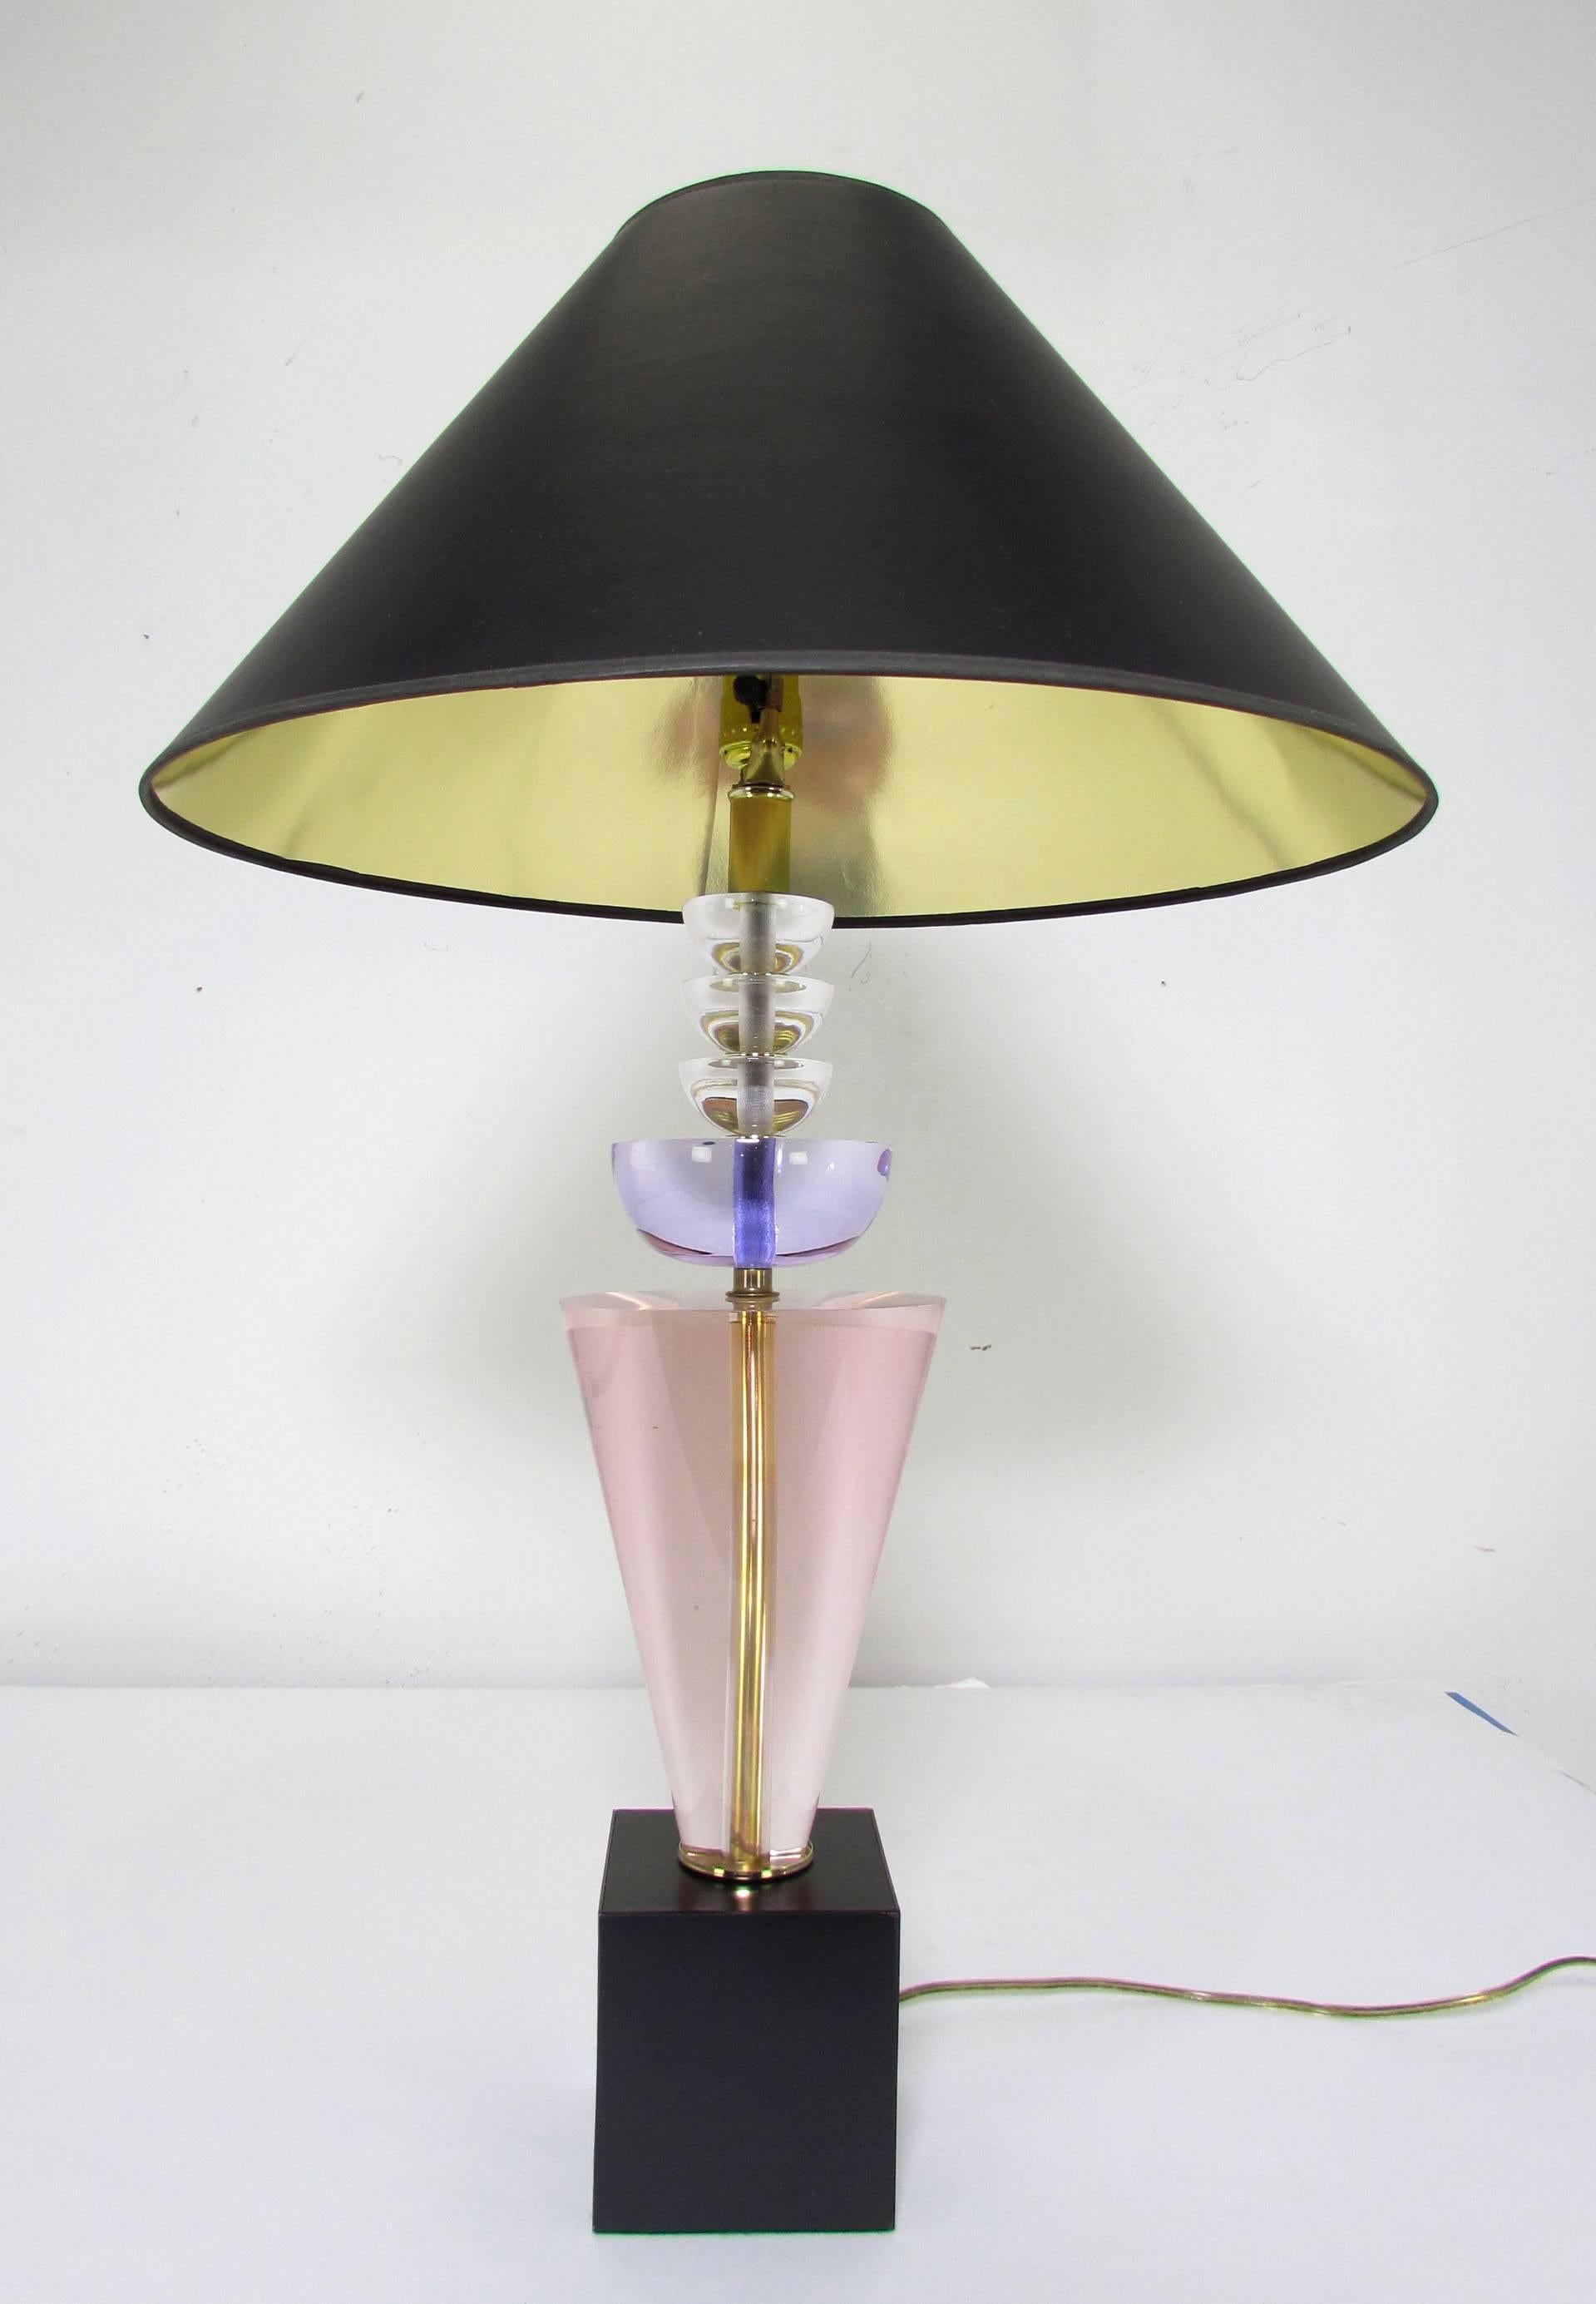 Pair of stacked Lucite table lamps by Hivo Van Teal, in purple, pink and clear elements, original Lucite ball finials and black shades with gold foil lining.

Lamps measure 31.5